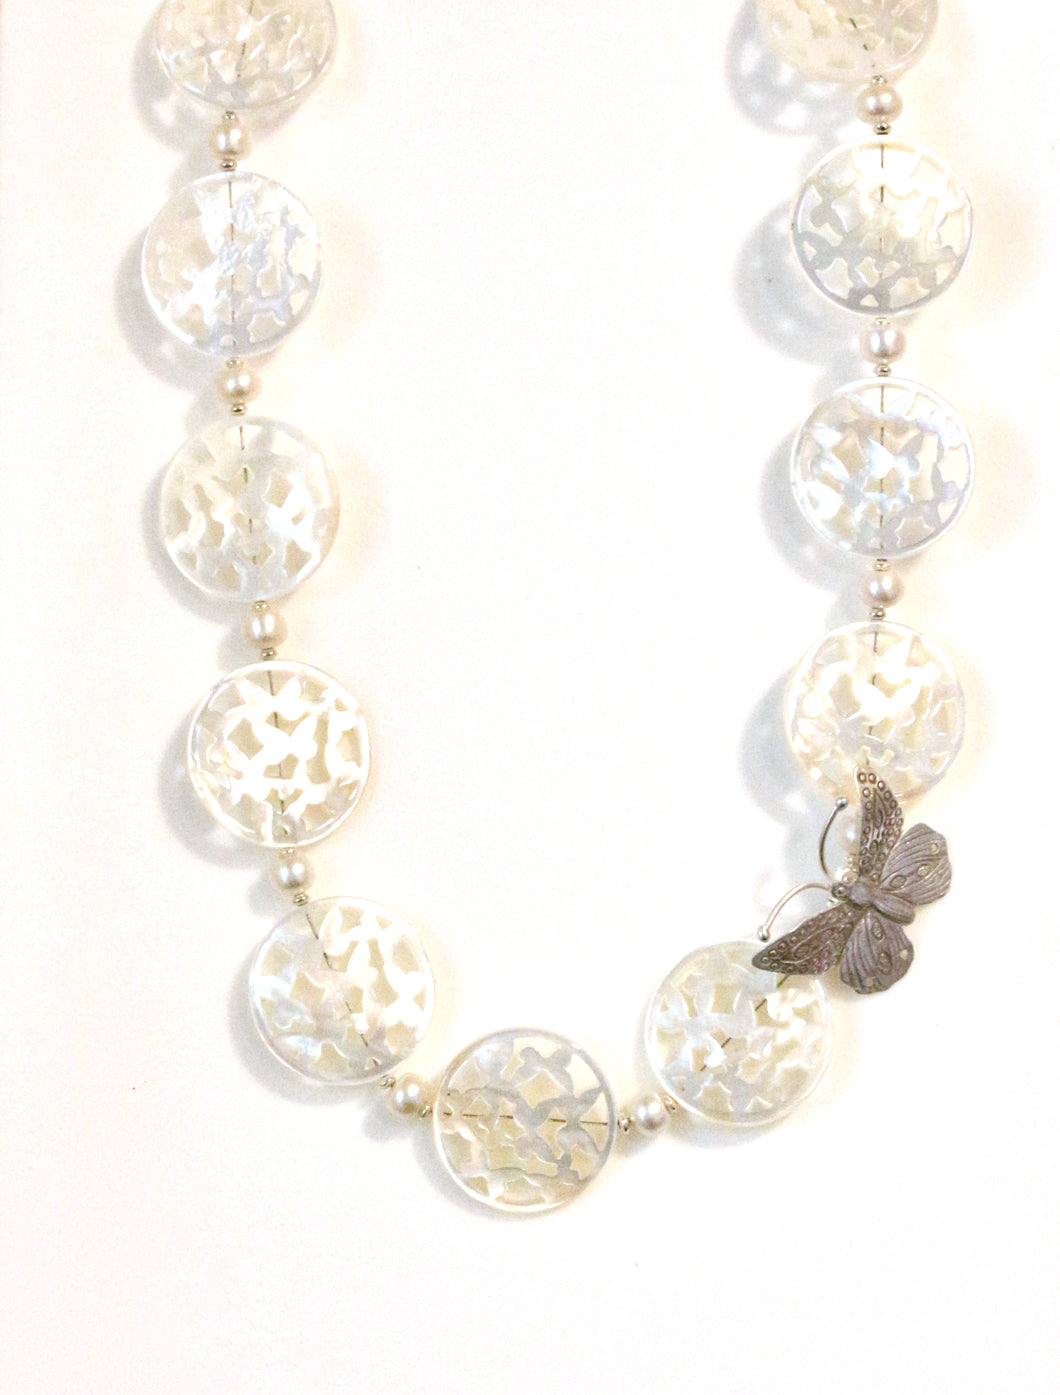 Australian Handmade White Necklace with Carved Mother of Pearl Pearls and Sterling Silver Butterfly